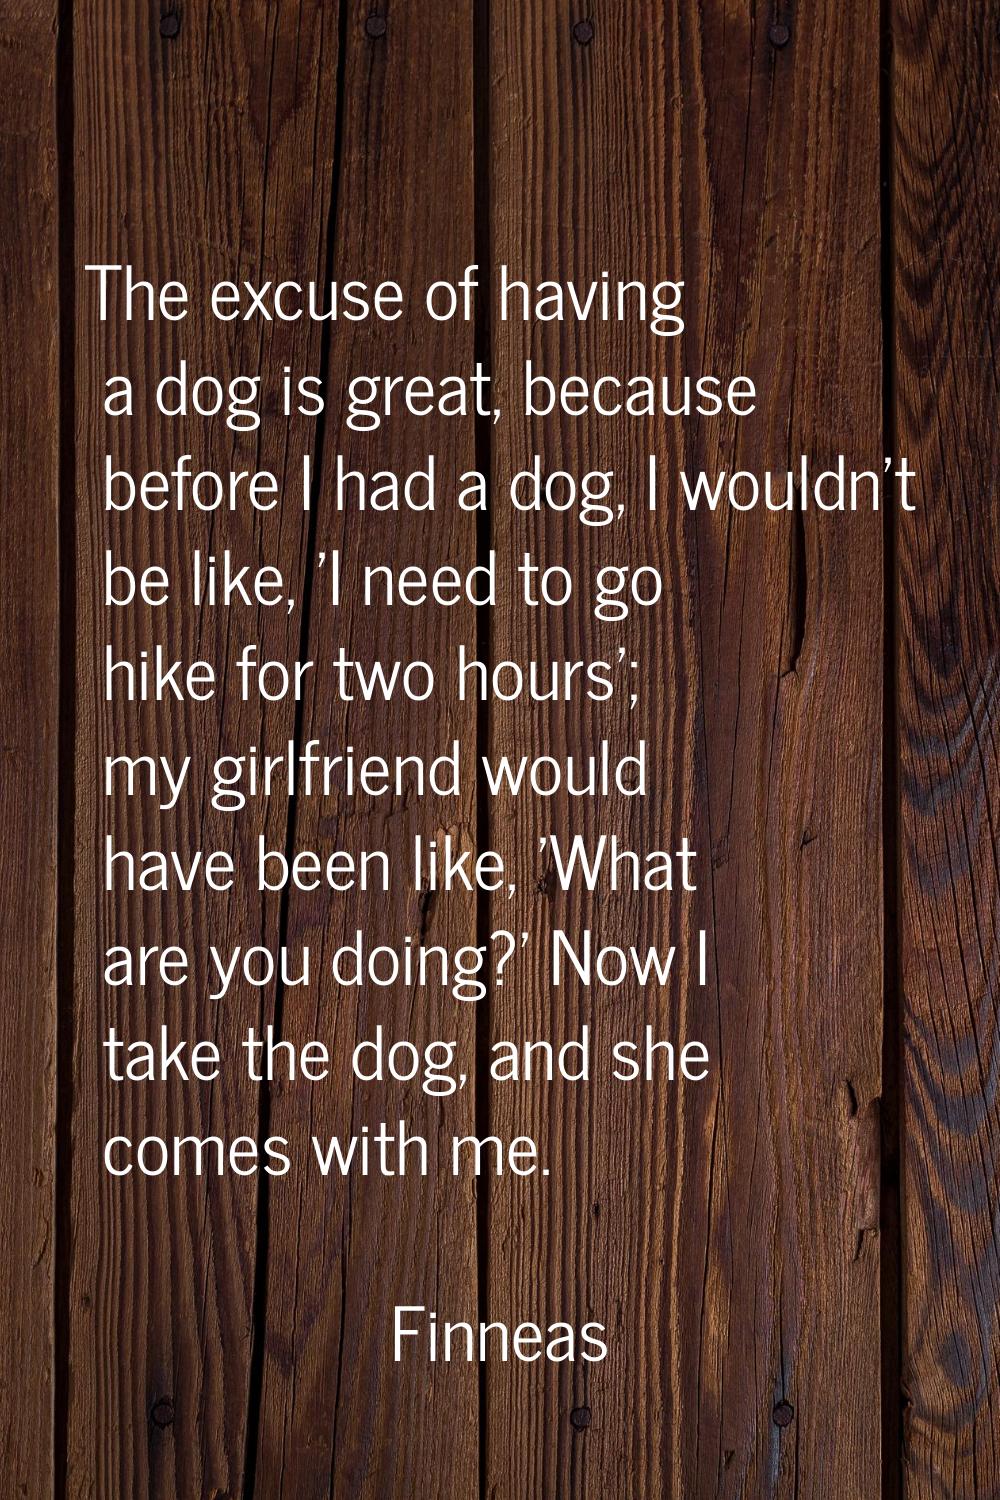 The excuse of having a dog is great, because before I had a dog, I wouldn't be like, 'I need to go 